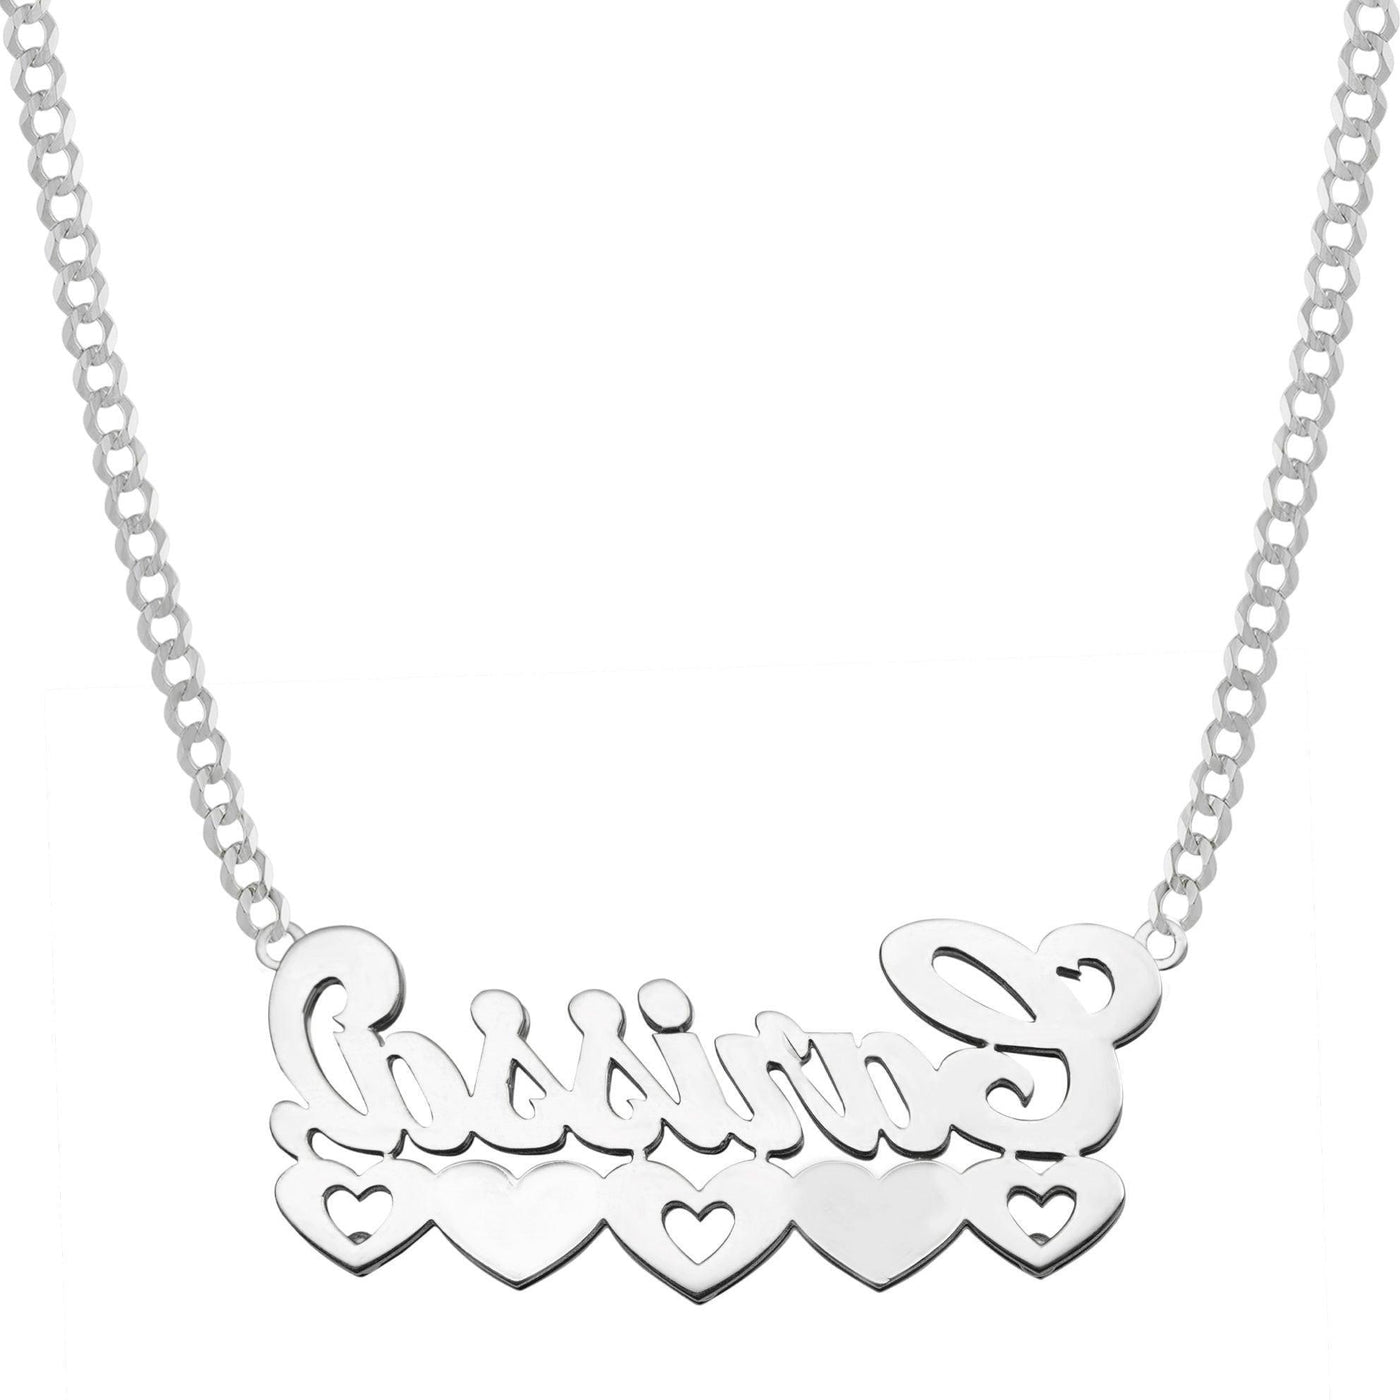 Ladies Script Name Plate Diamond Hearts Necklace 14K White Gold - Style 48 - bayamjewelry